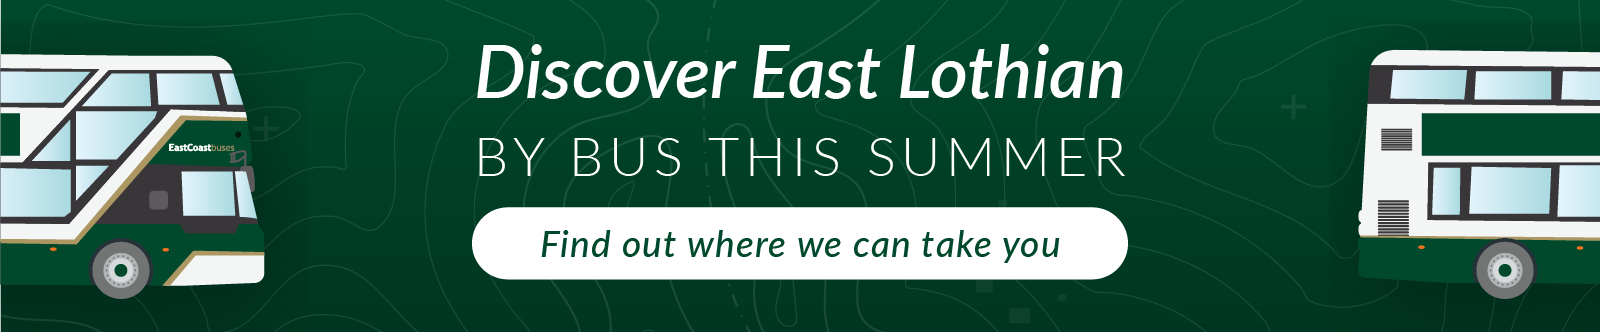 Discover East Lothian by bus this summer. Find out where we can take you.